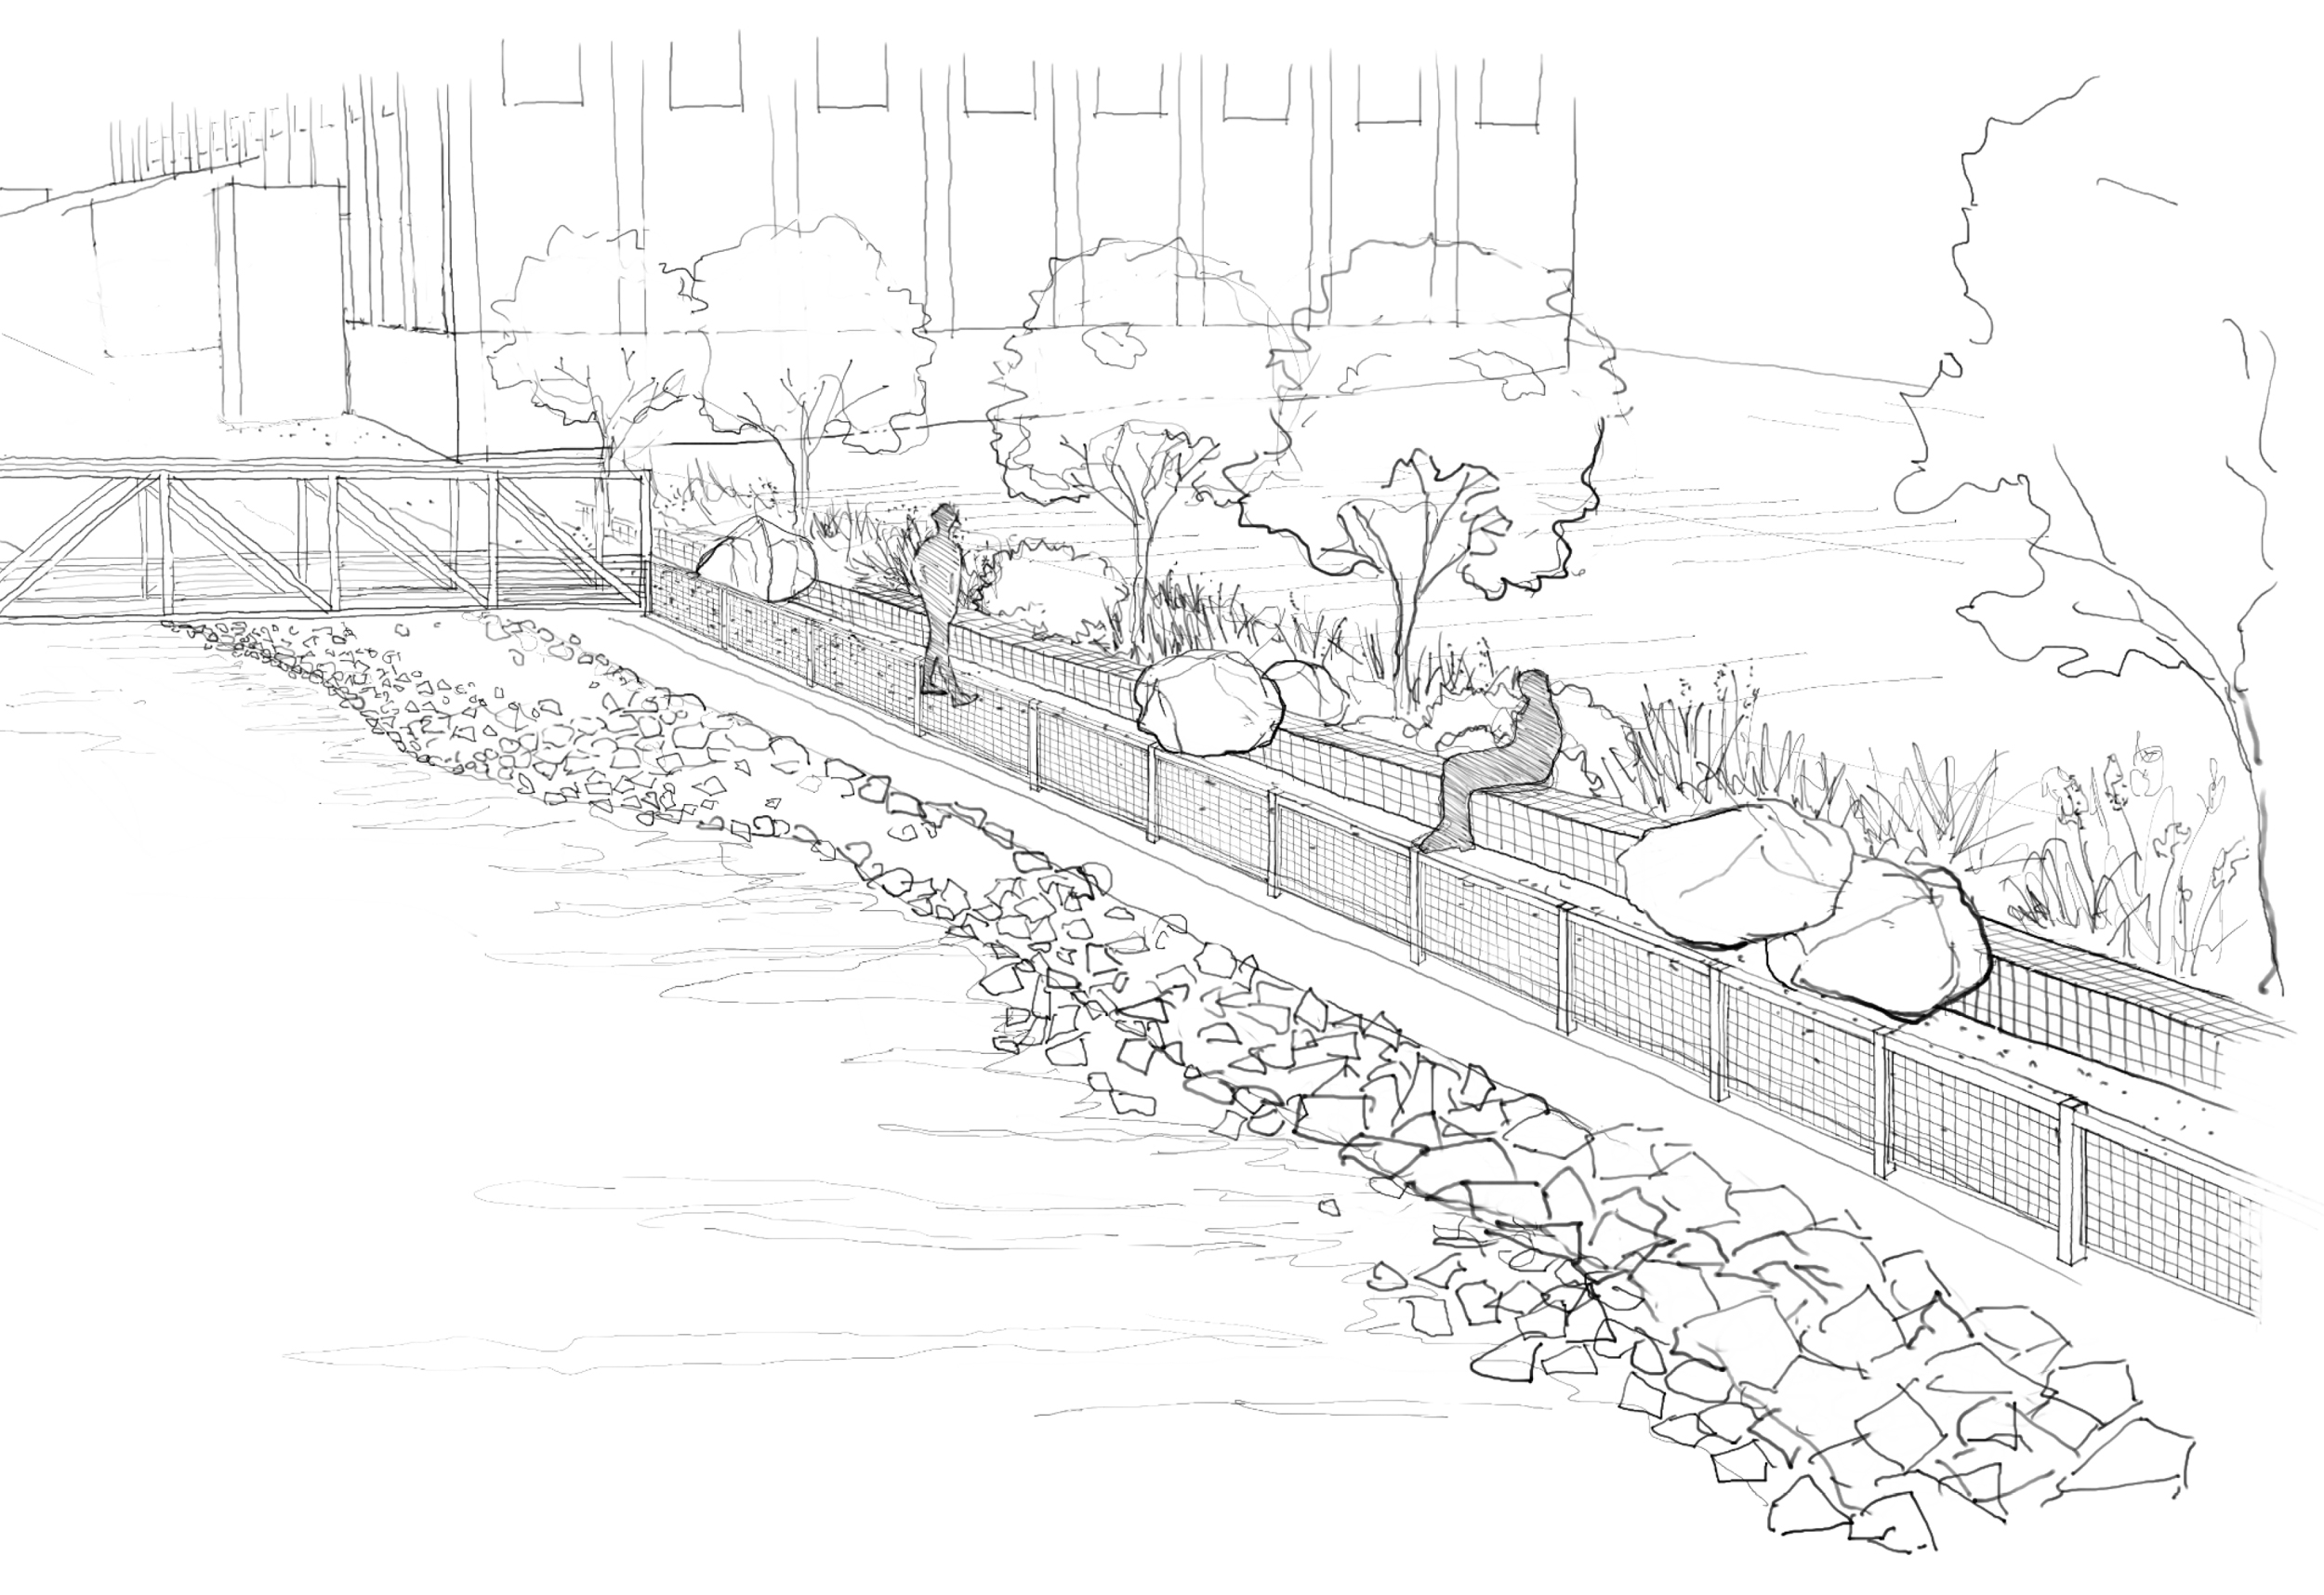 23rd Street Bay Trail extension, illustration by Groundworks Office